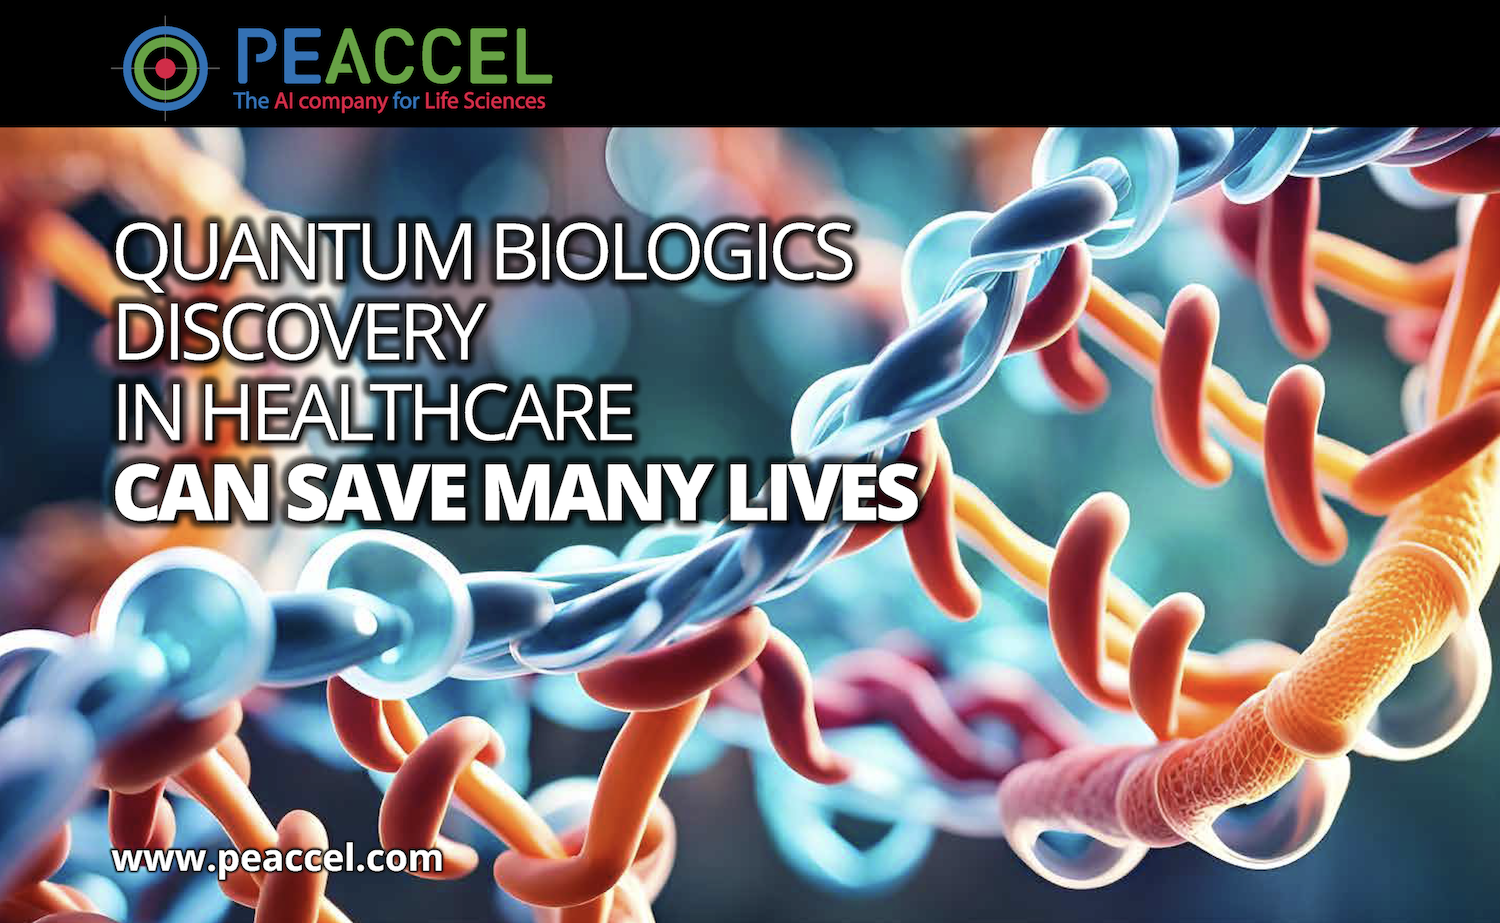 Quantum biologics discovery in healthcare can save many lives